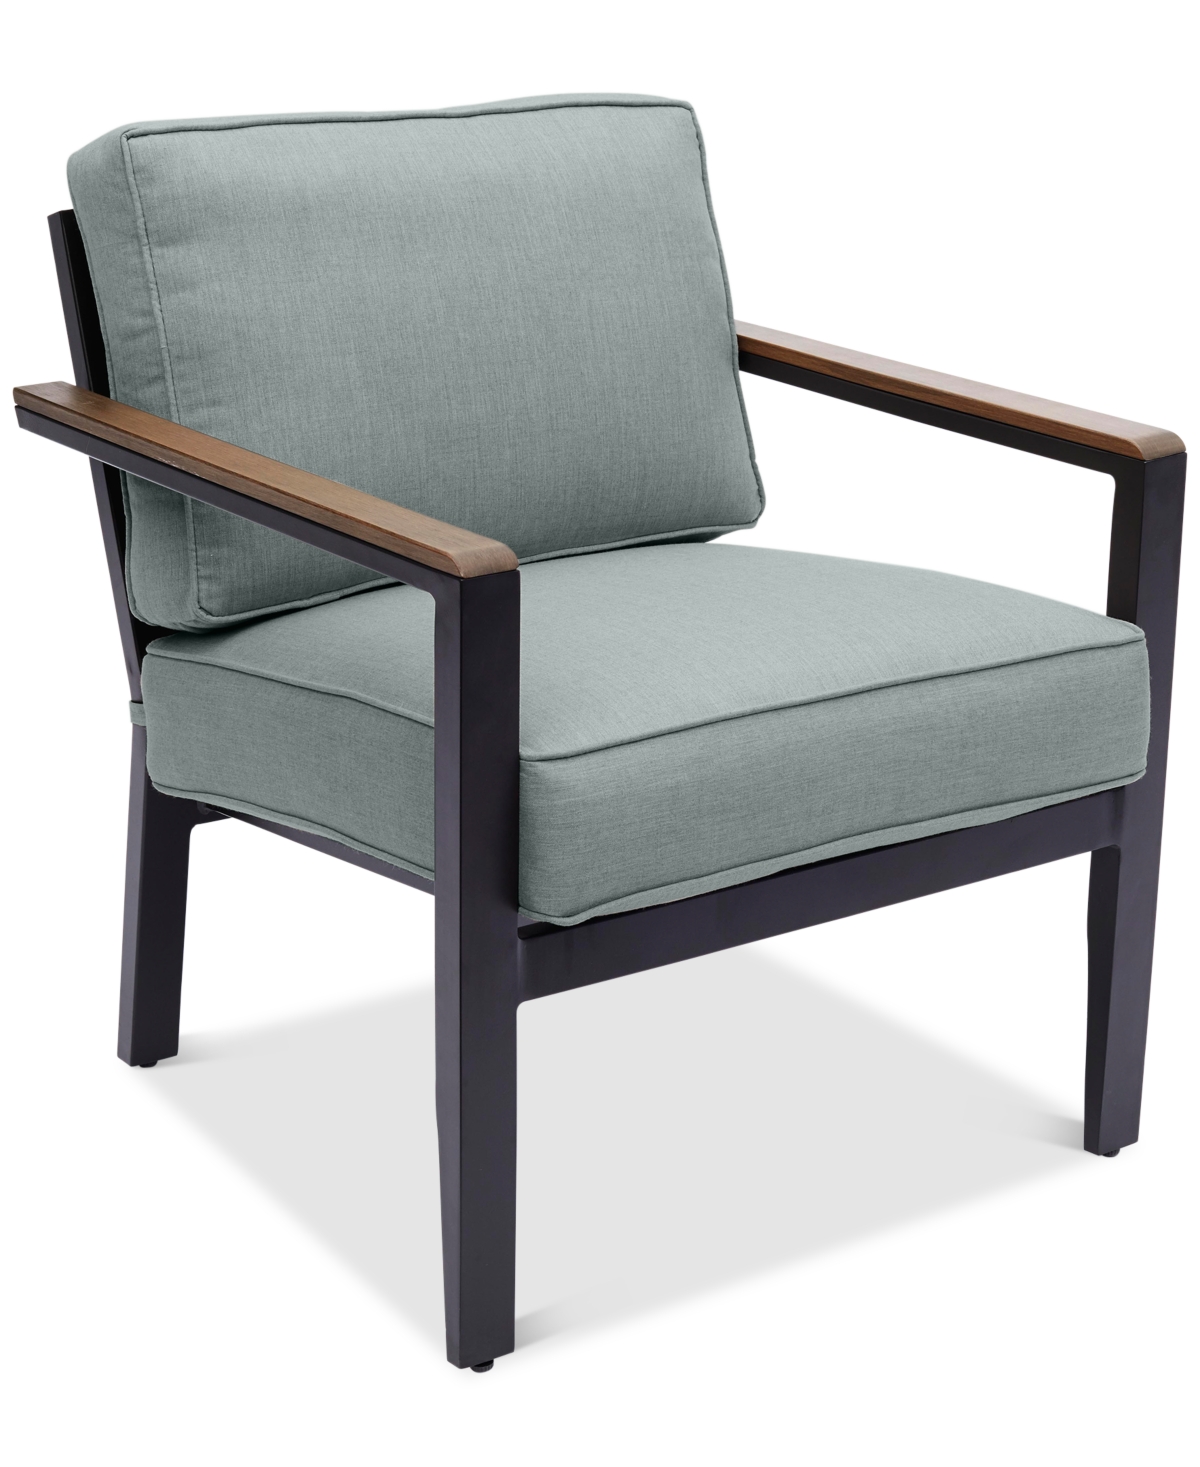 10404142 Stockholm Outdoor Club Chair with Outdura Cushions sku 10404142